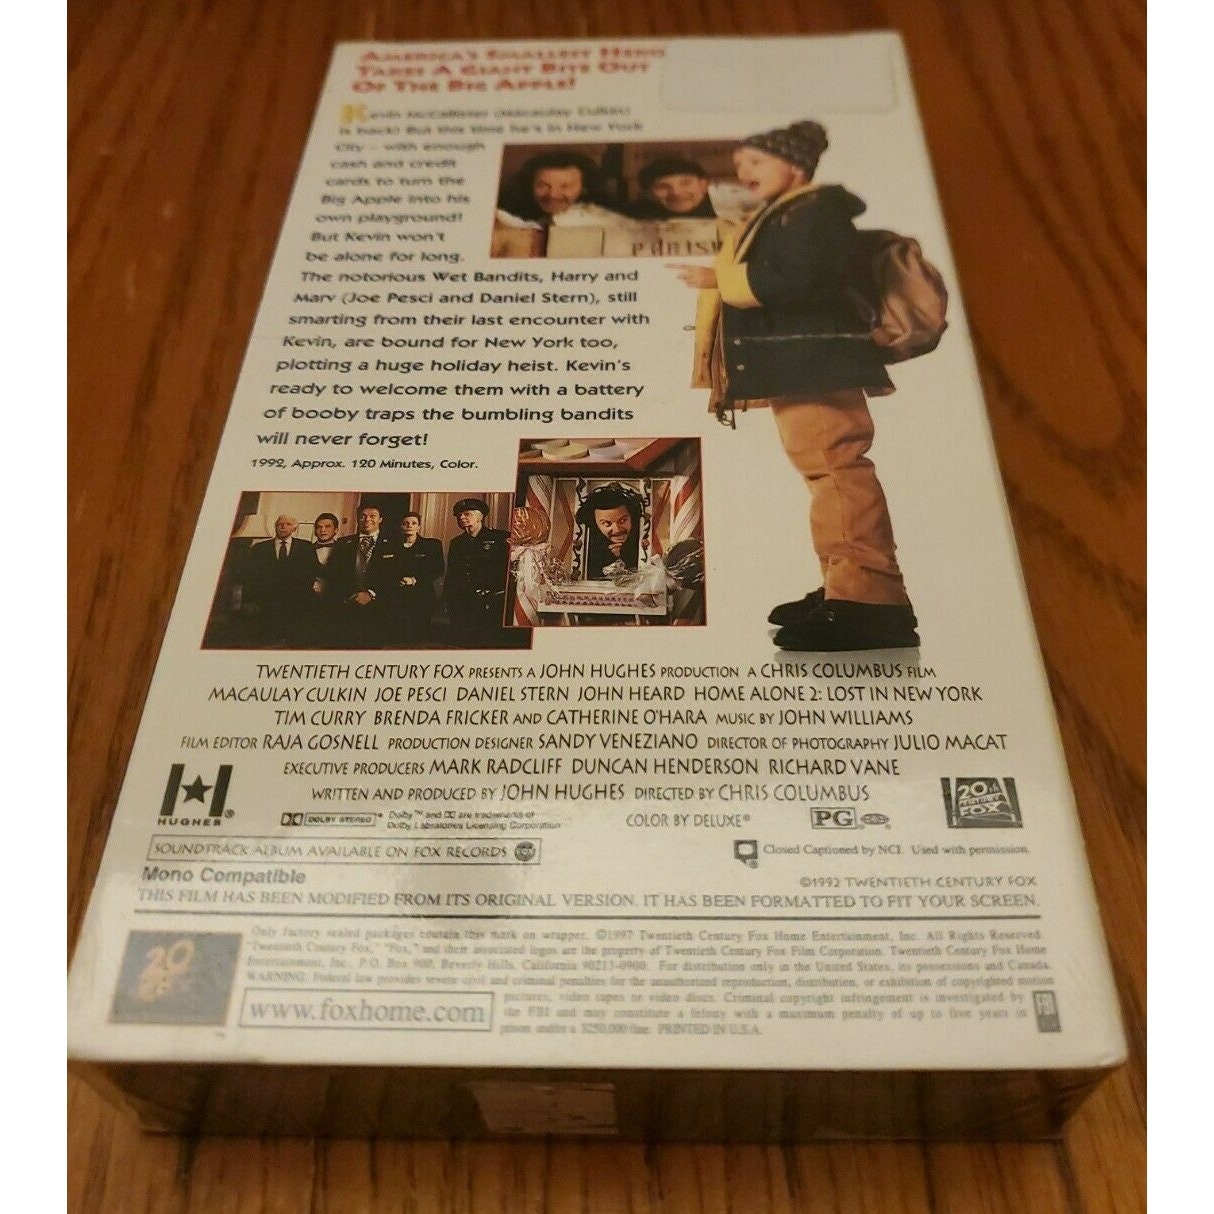 Home Alone 2: Lost in New York Sealed (VHS, 1993)